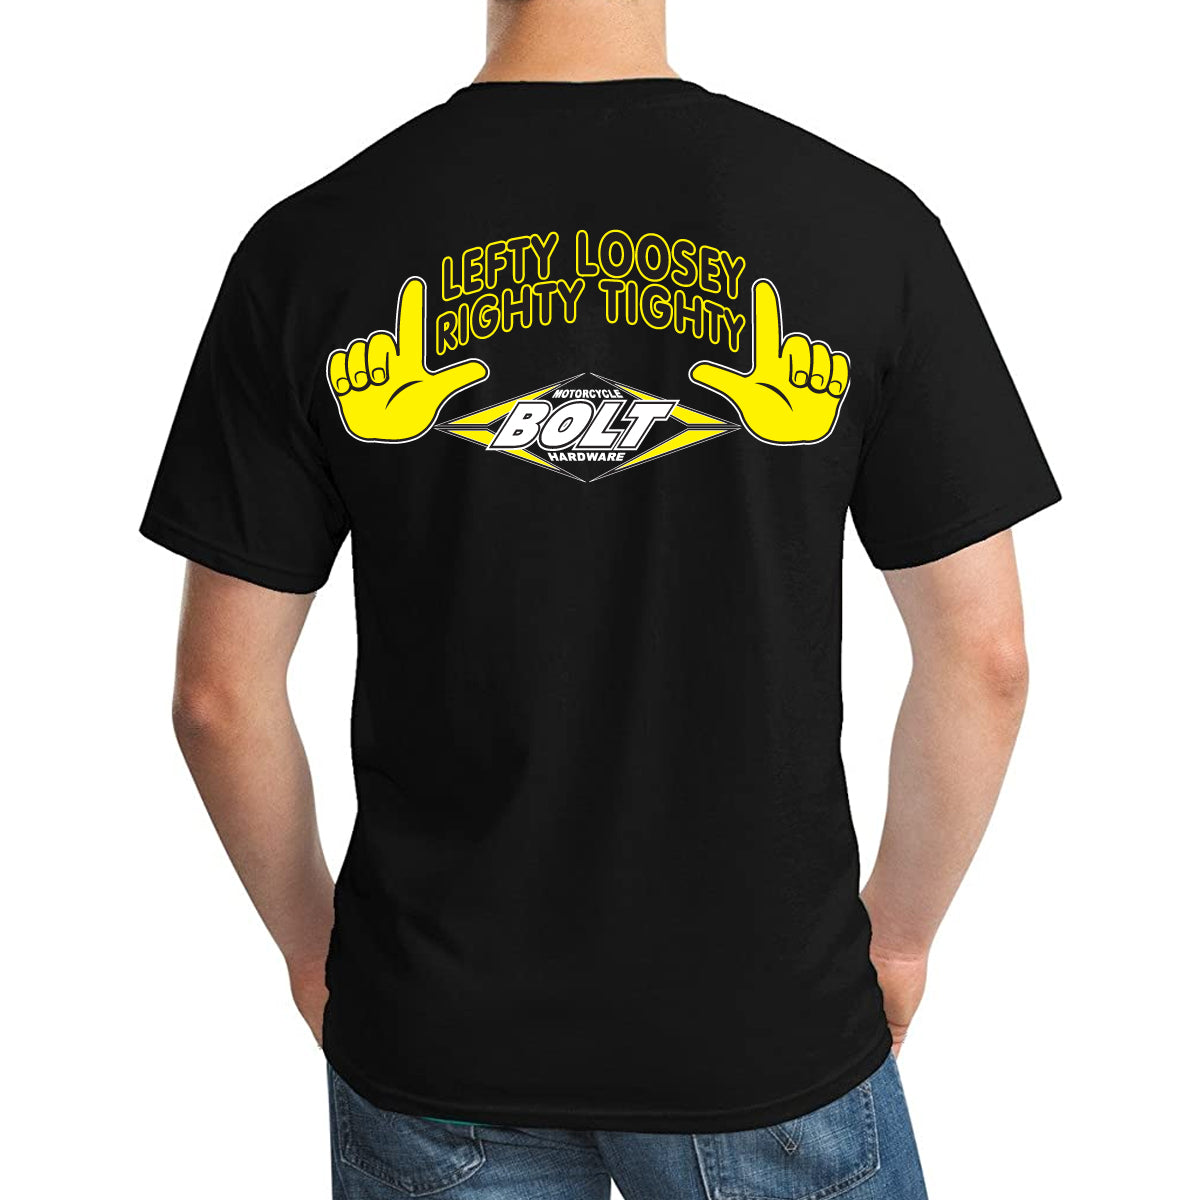 Righty Tighty Lefty Loosey Crew Neck T-Shirt – Bolt Motorcycle Hardware